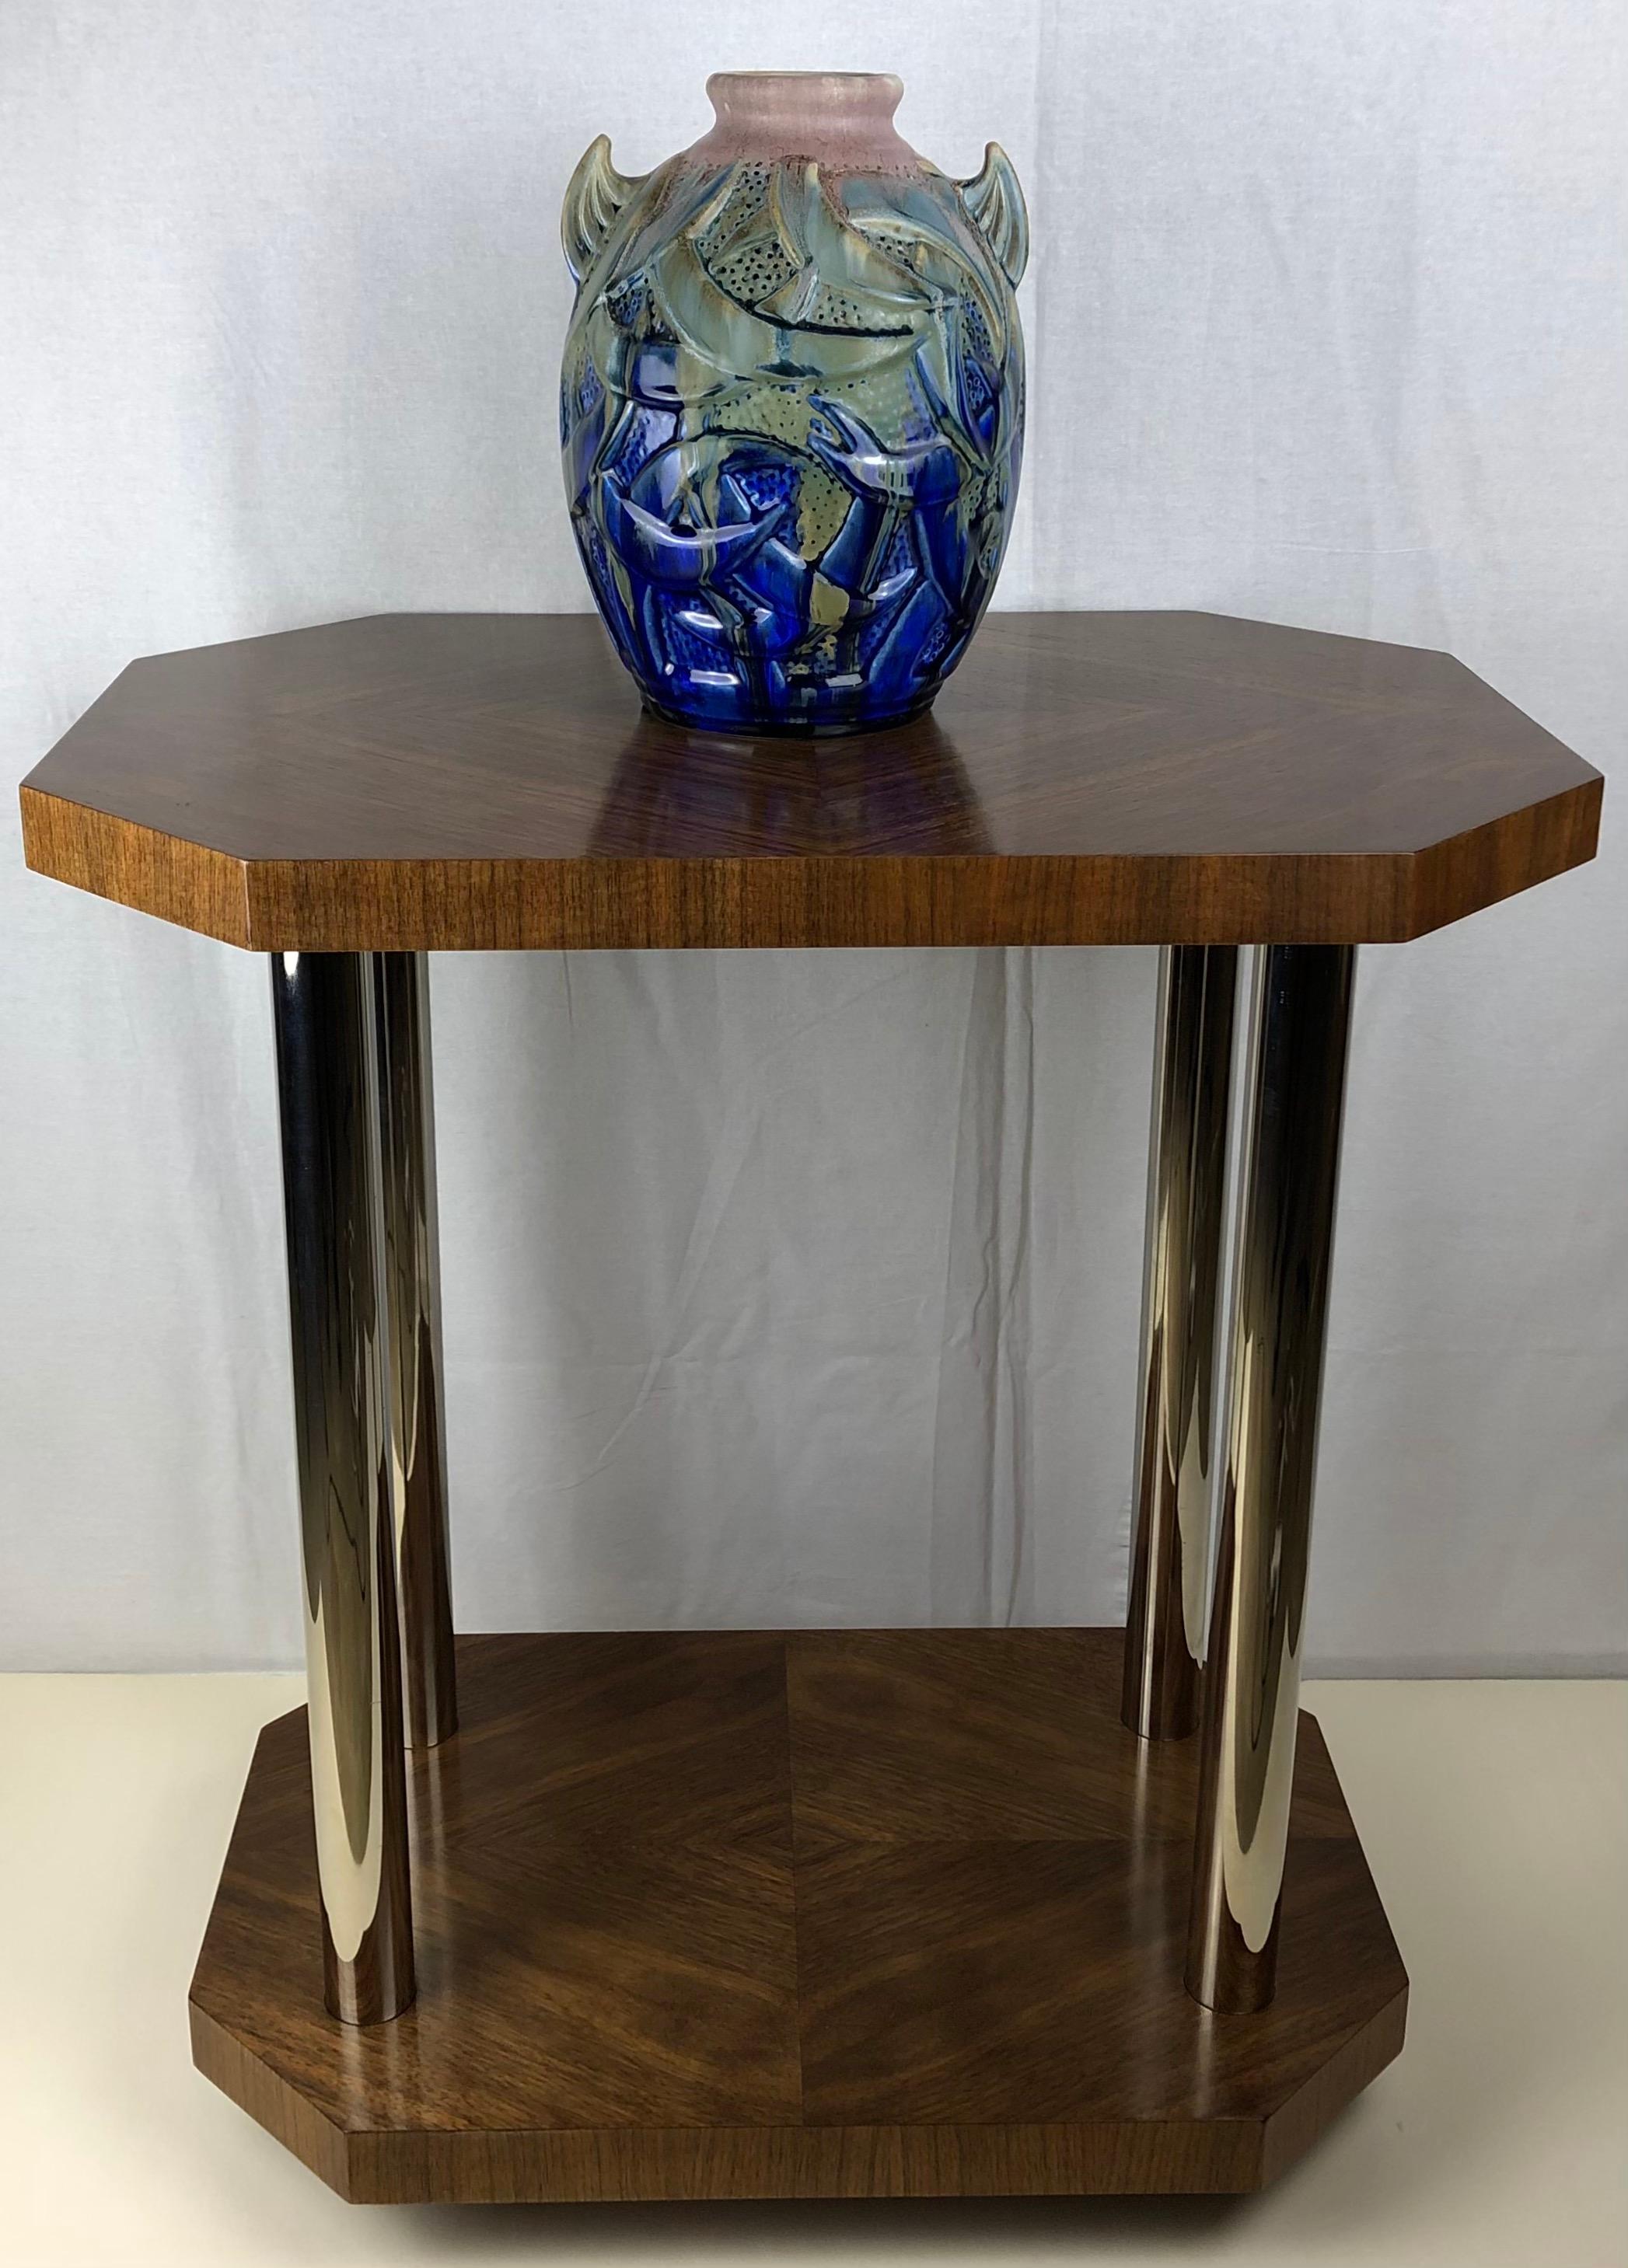 Original sleek designed French two-tiered Art Deco side table.

This beautiful table is made of walnut veneer that has been completely refinished. The top and bottom shelf both feature a perfectly centered diamond shape design. There are four